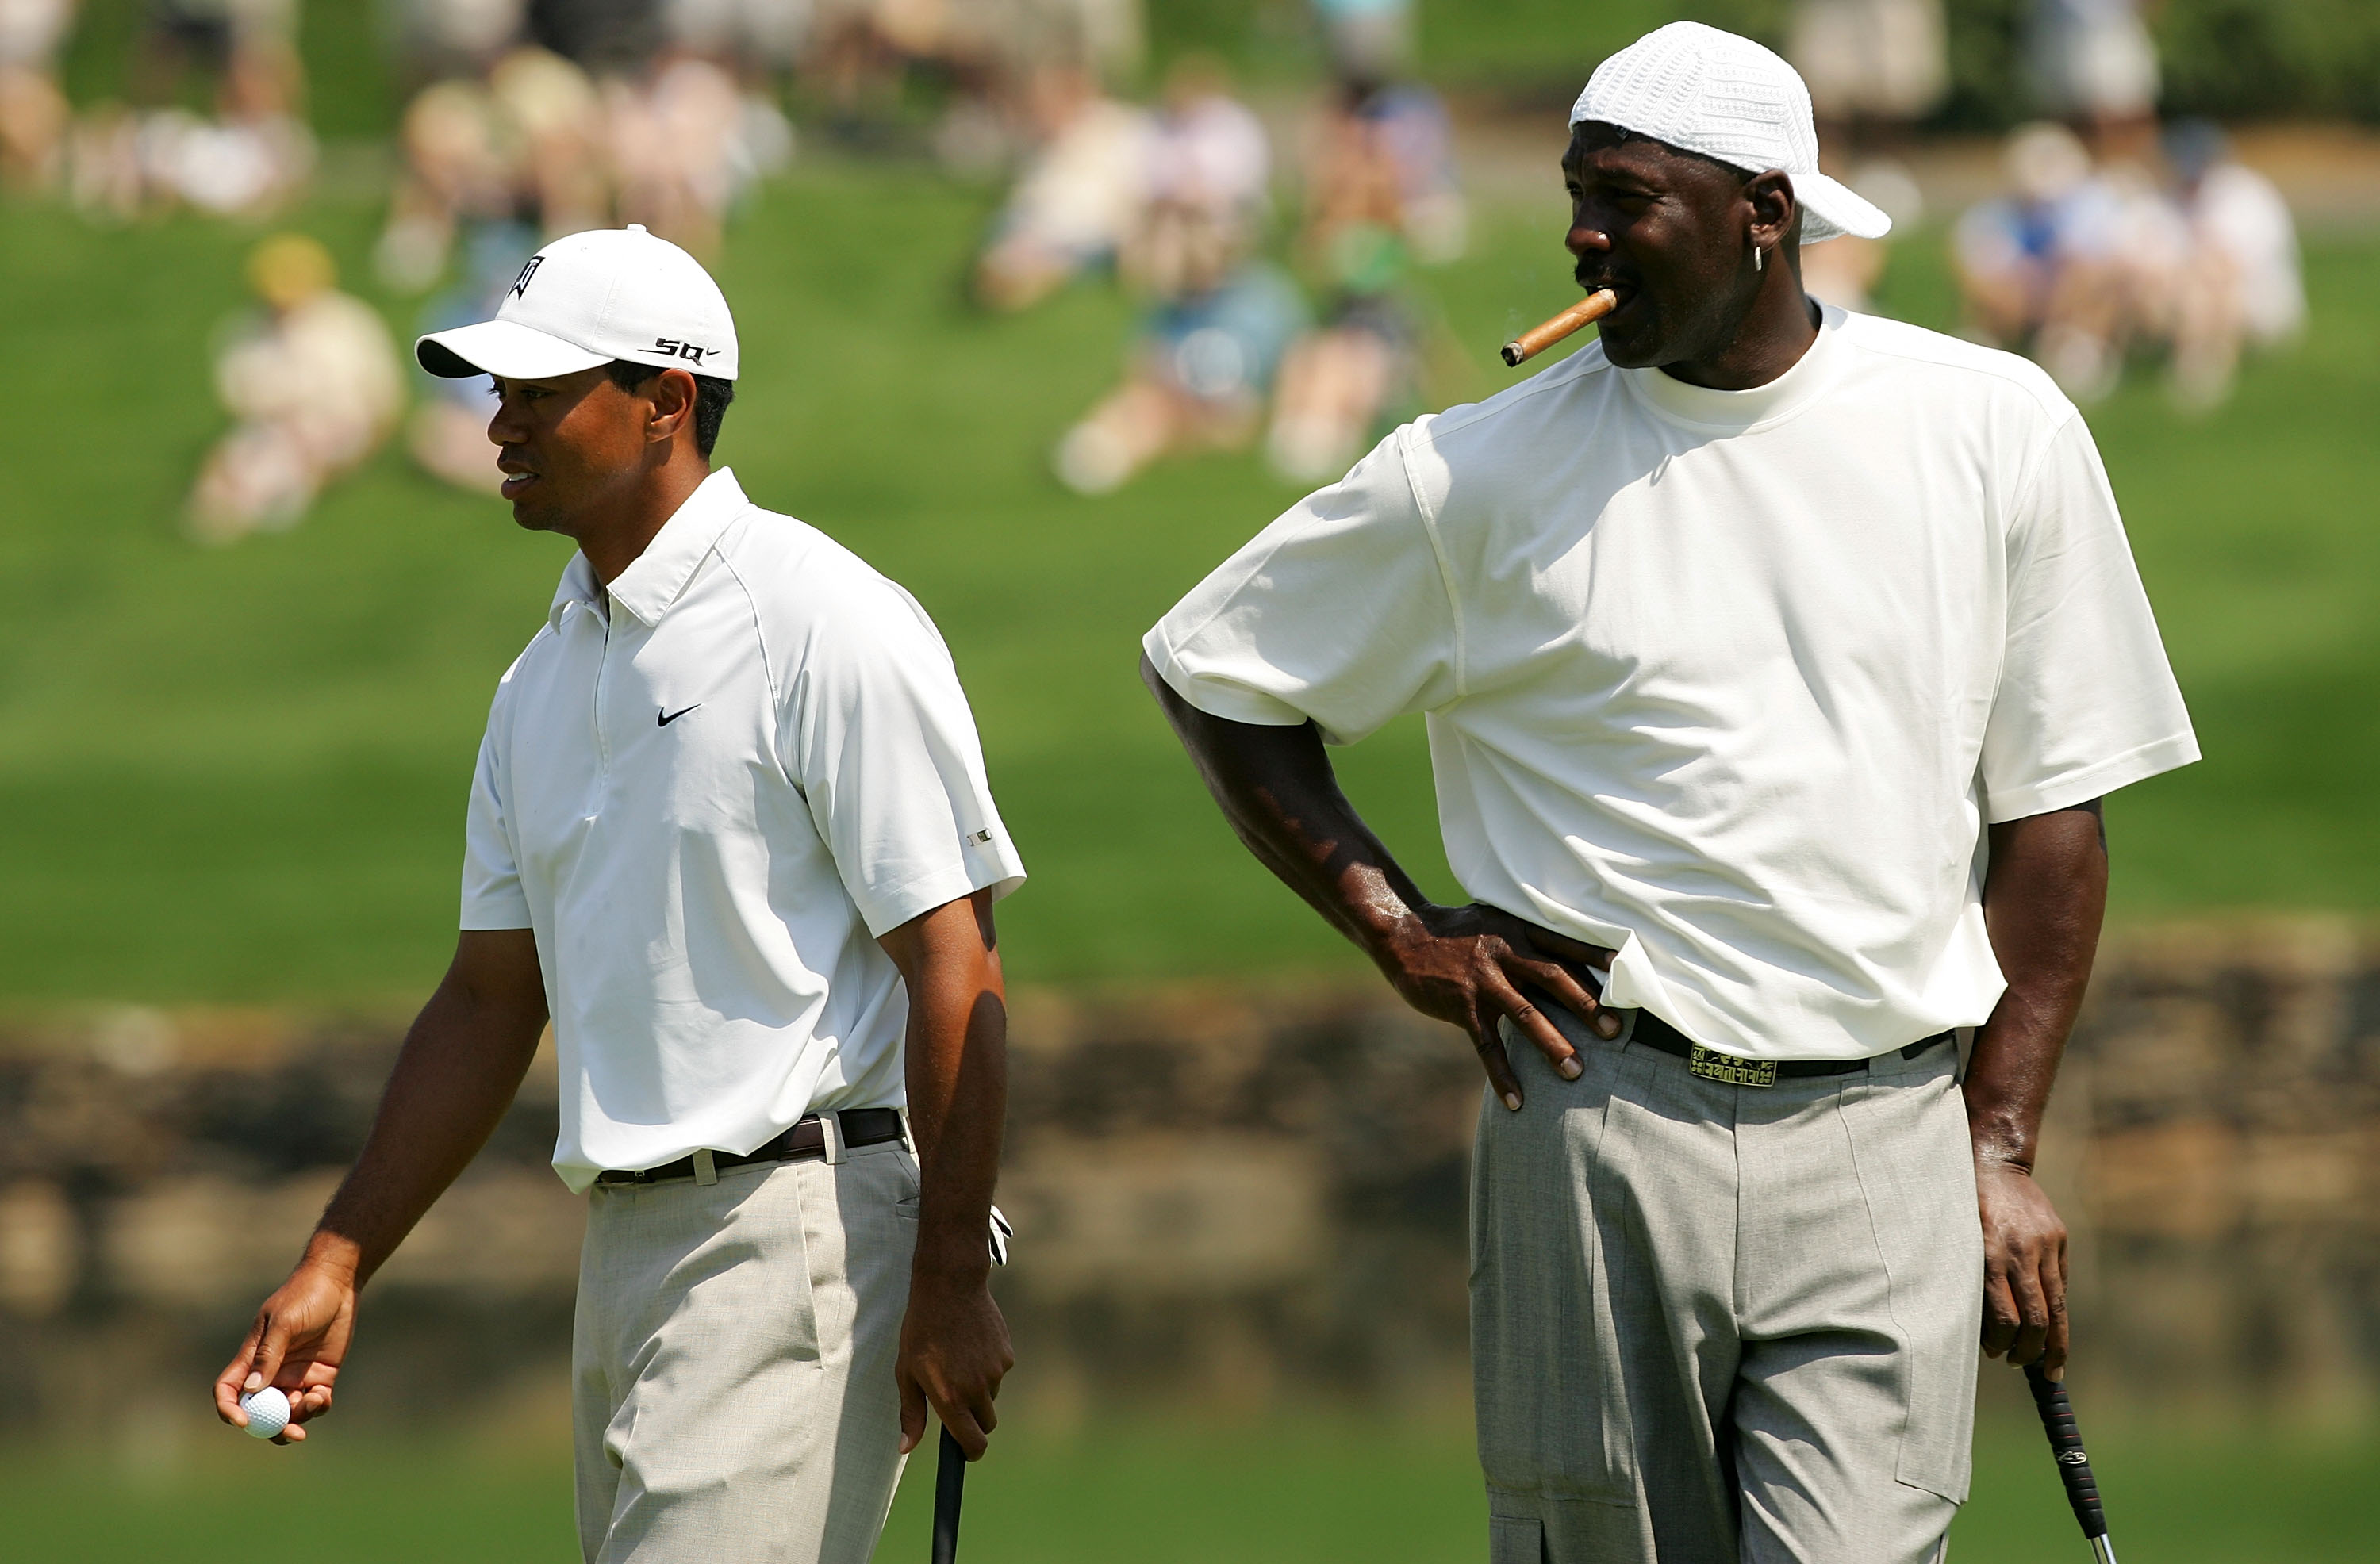 Tiger Woods and Michael Jordan playing golf together